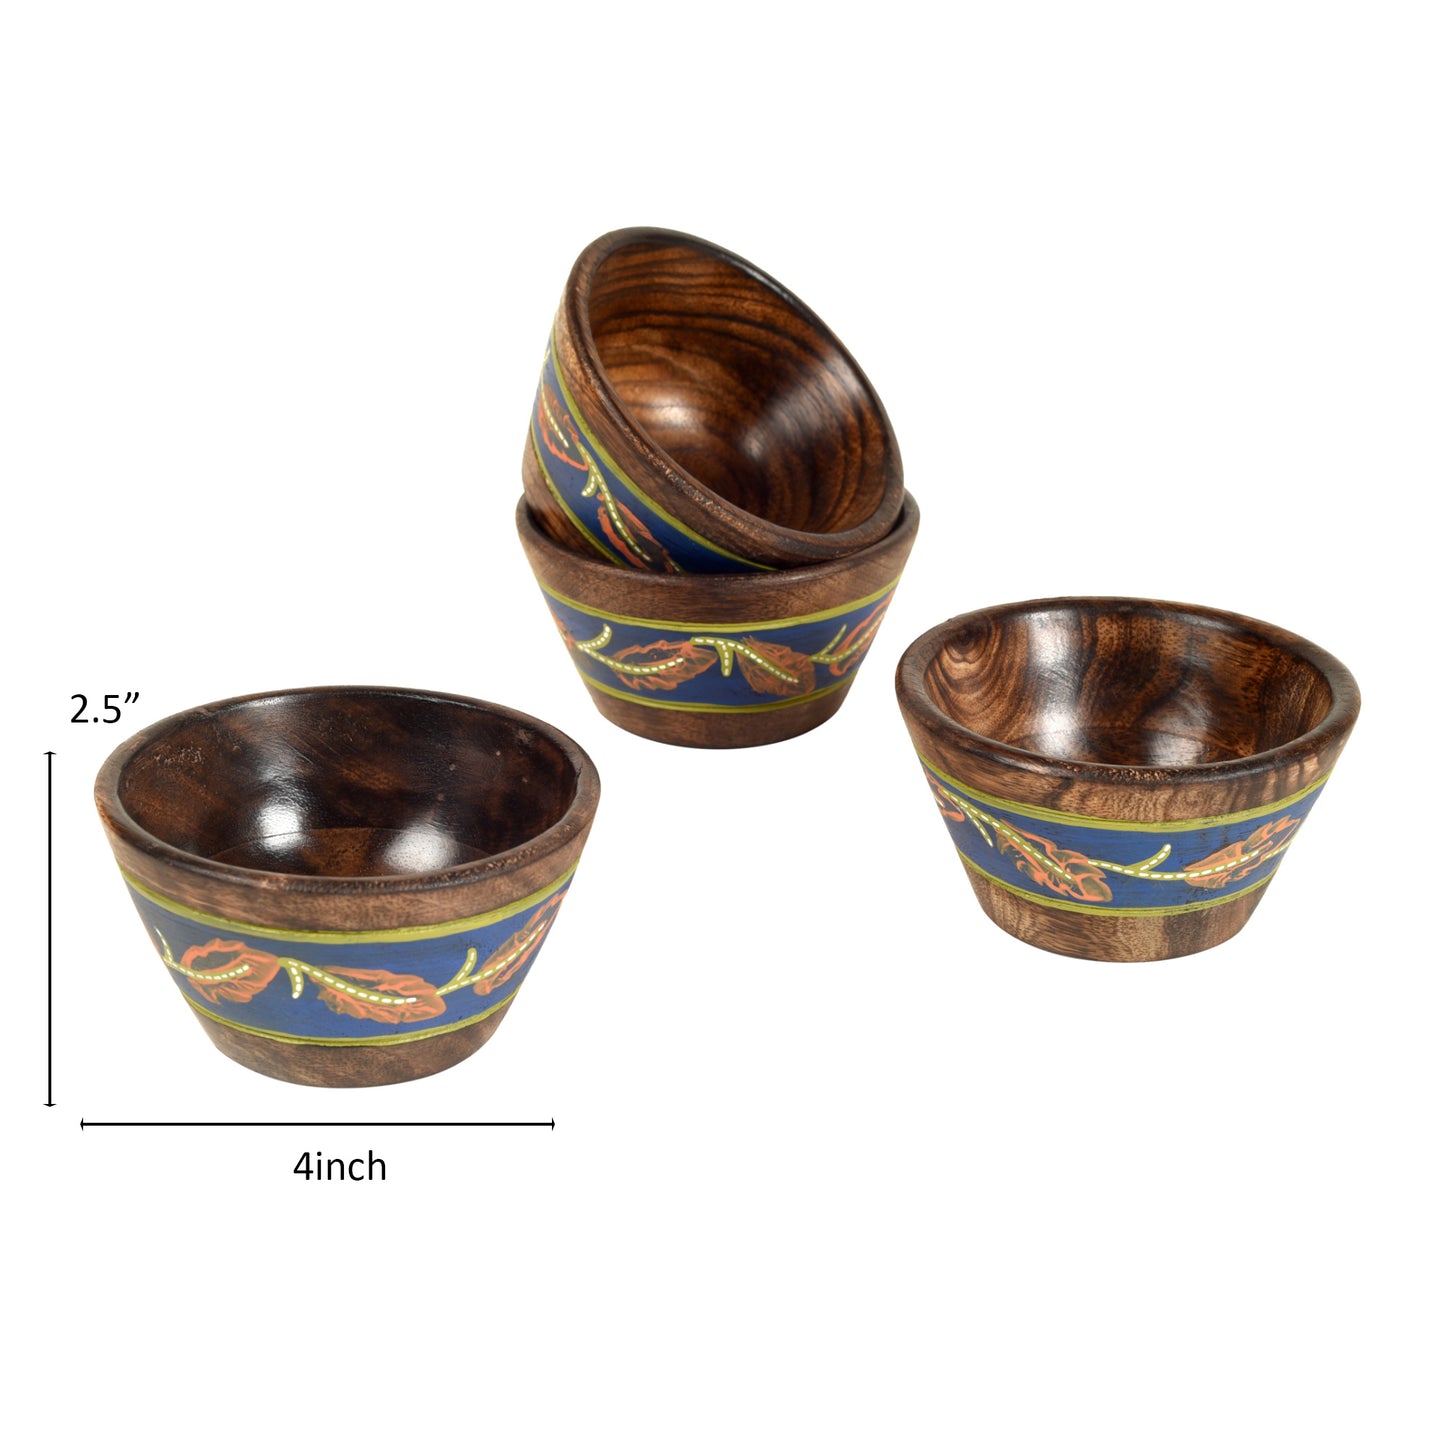 Hand-painted Wooden Autumn Leaf Bowls-Set of 4